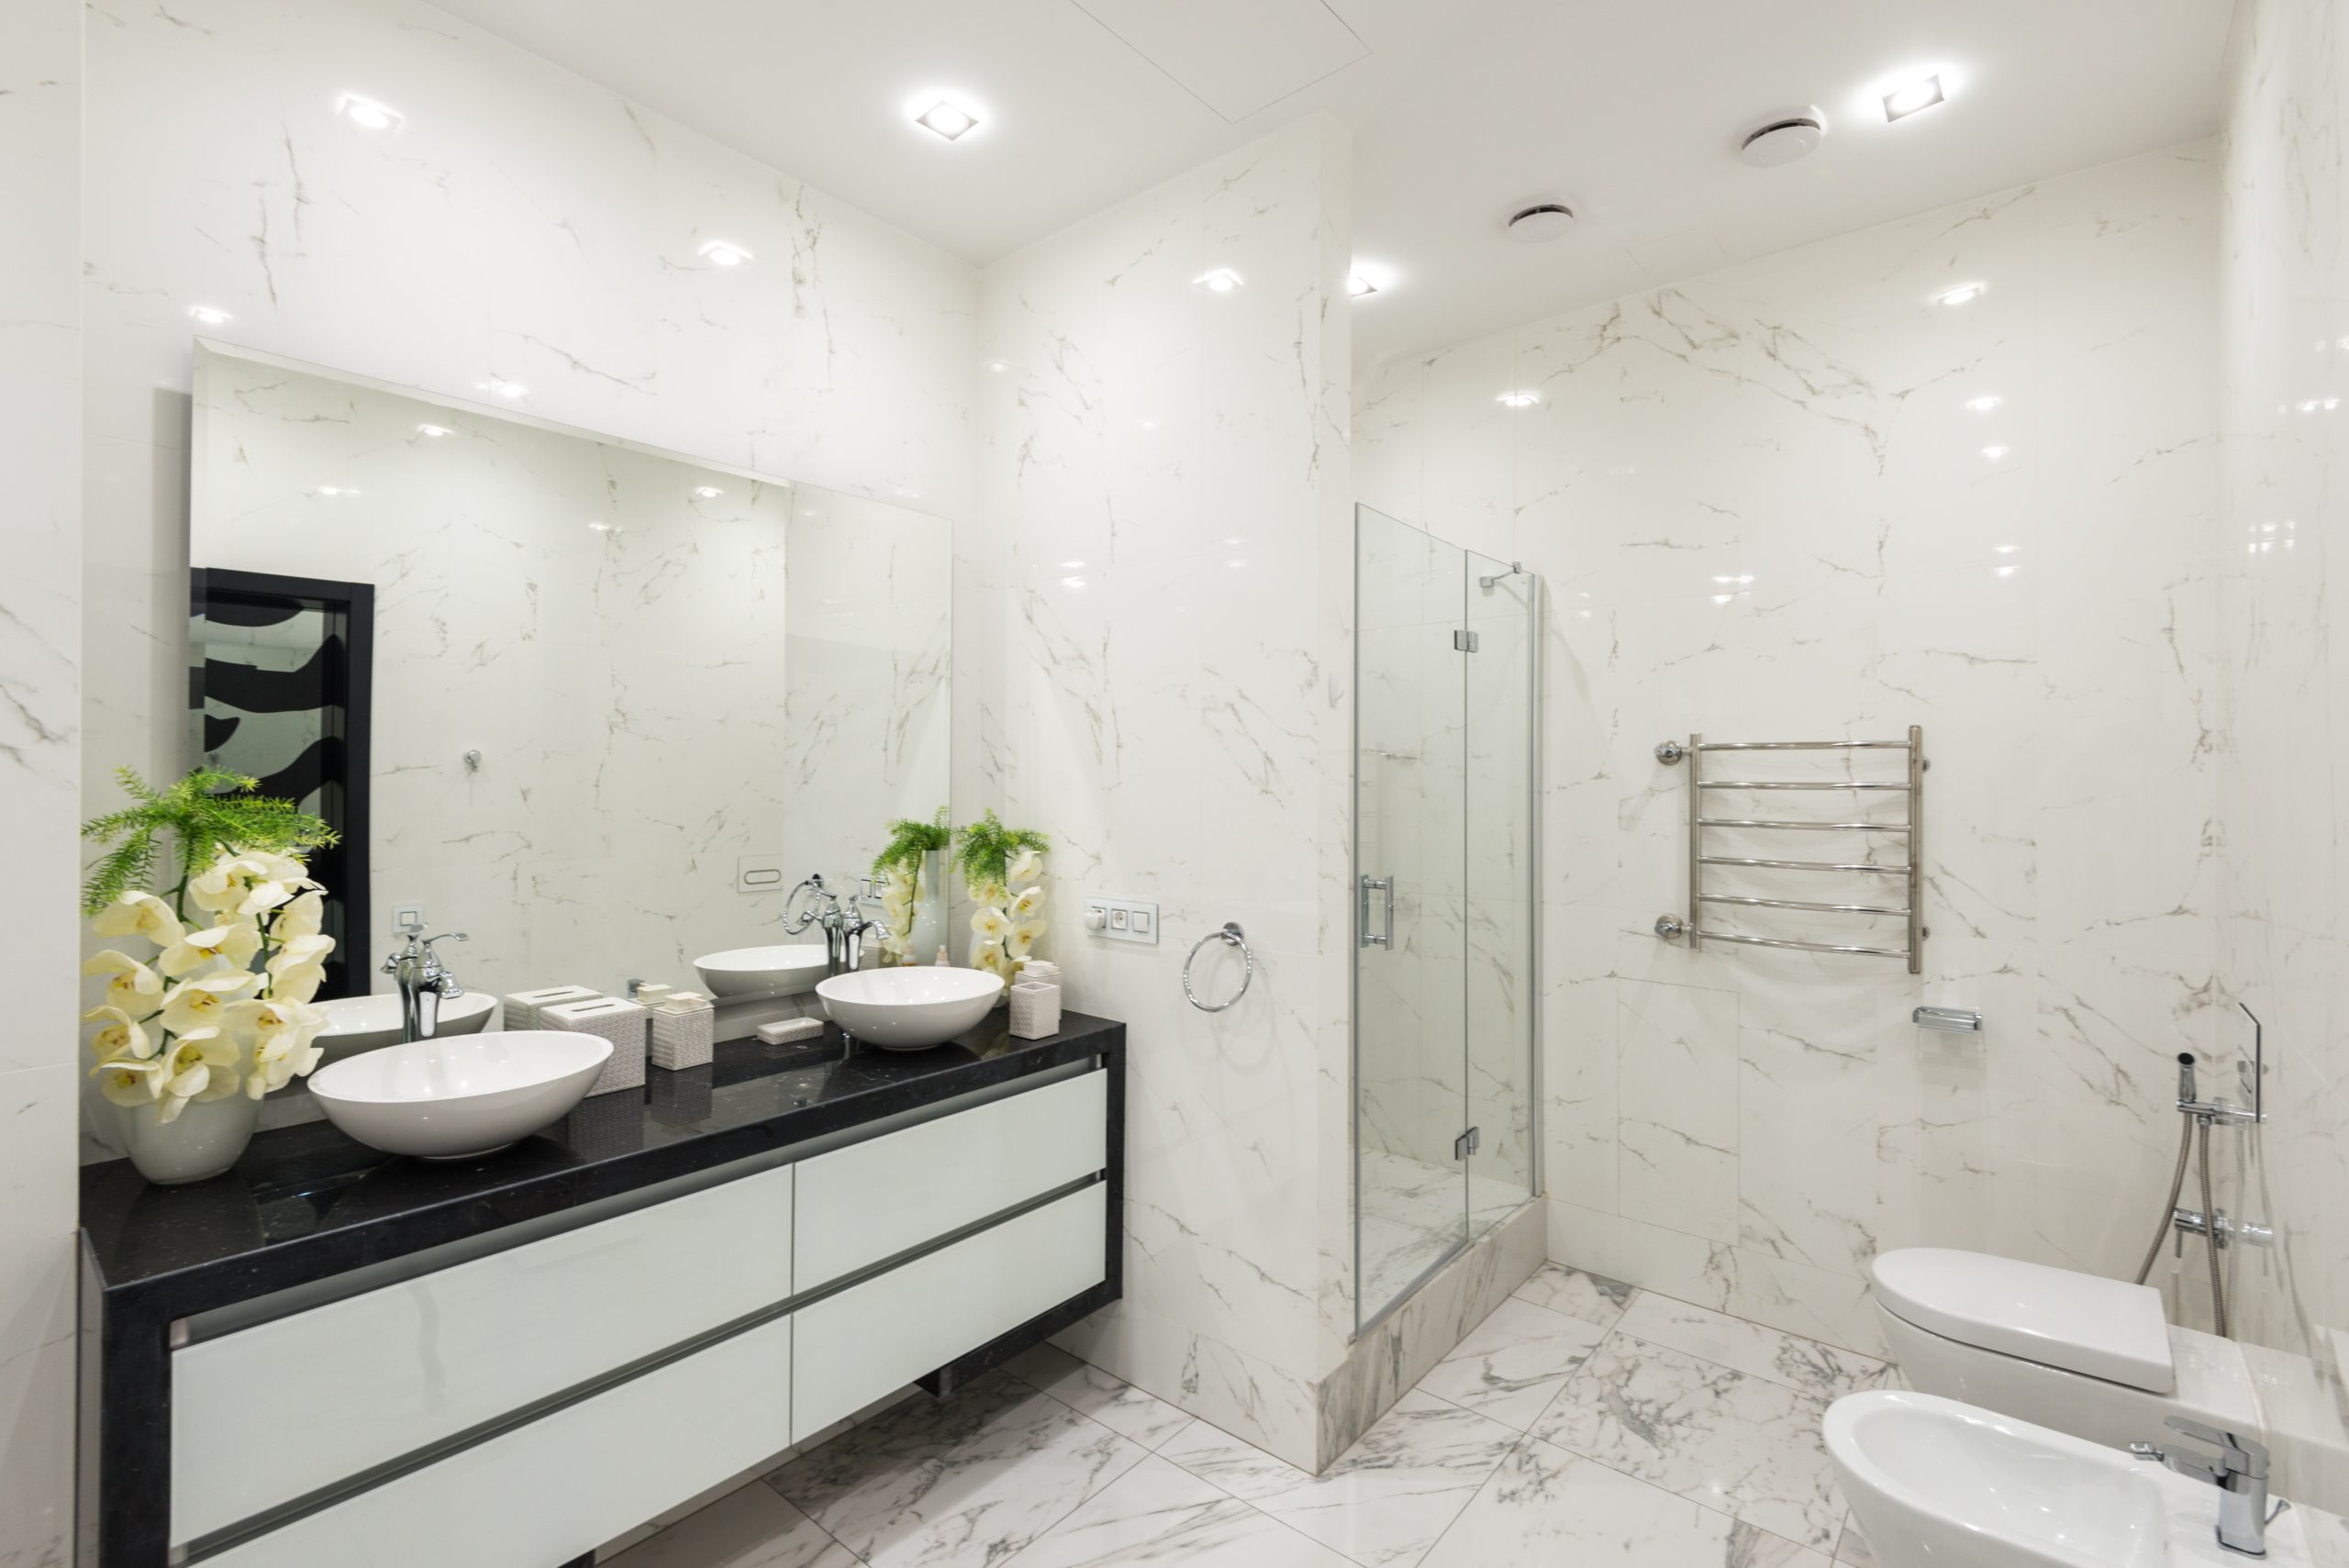 Bathroom Remodeling, Glass Shower, Freestanding Tub, Matching Floor and Wall Tile